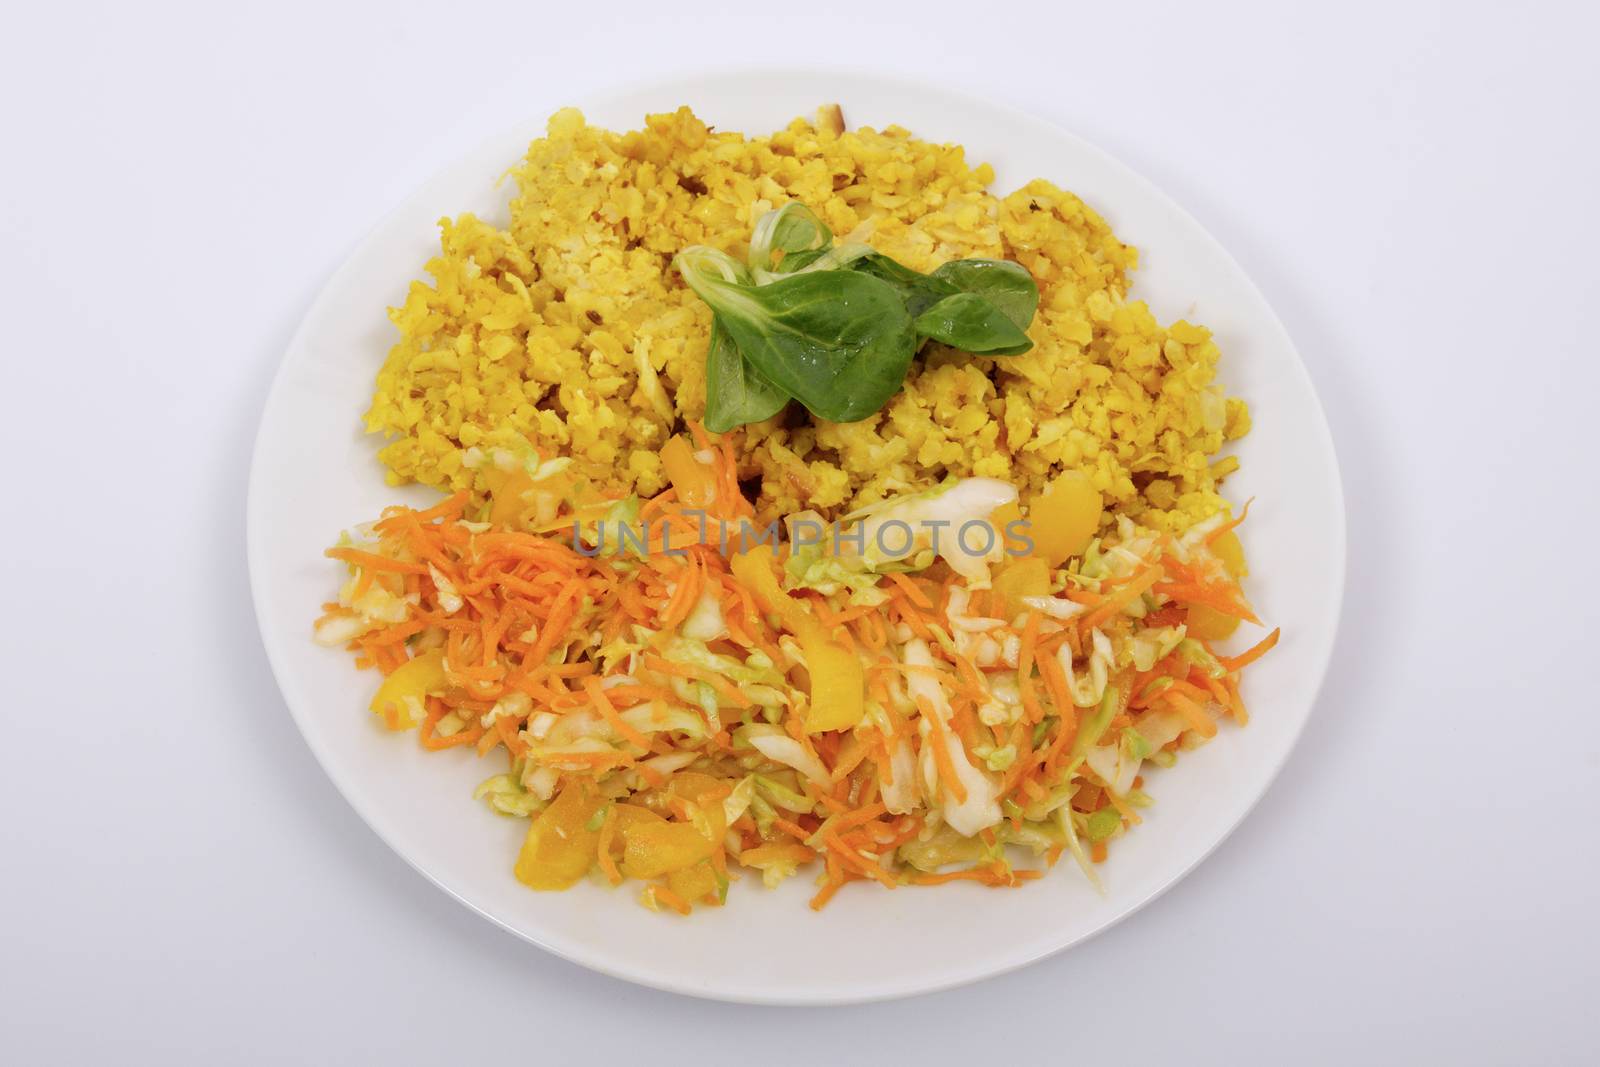 Baked Bulgar with cauliflower and vegetable salad on a white background